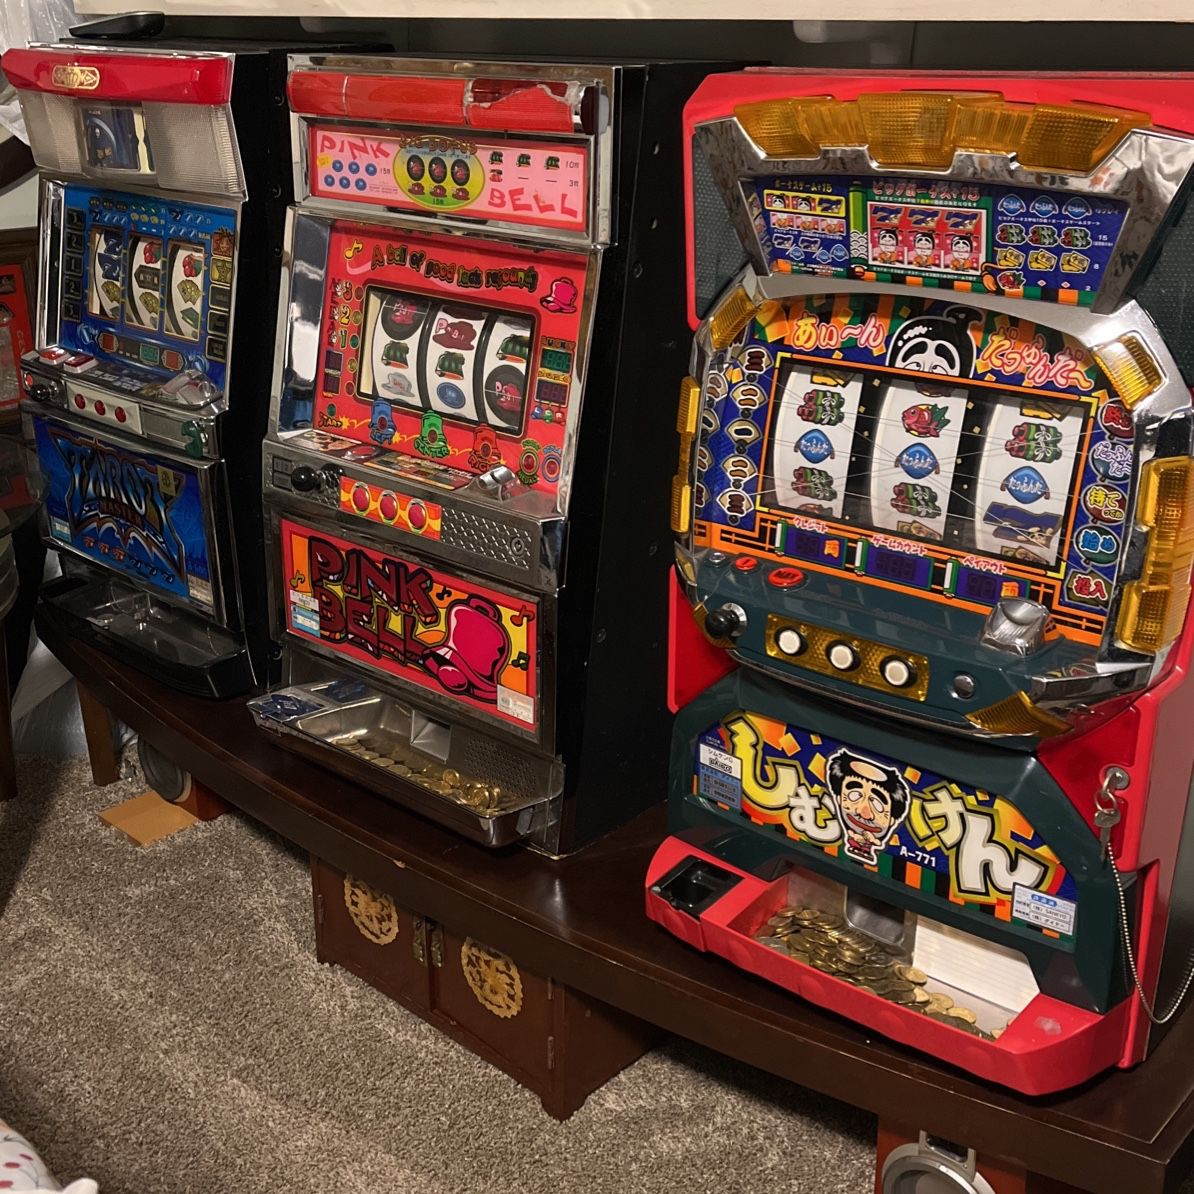 Slot Machines 450.00 For The Three/open For Trade Or Two For 350.00